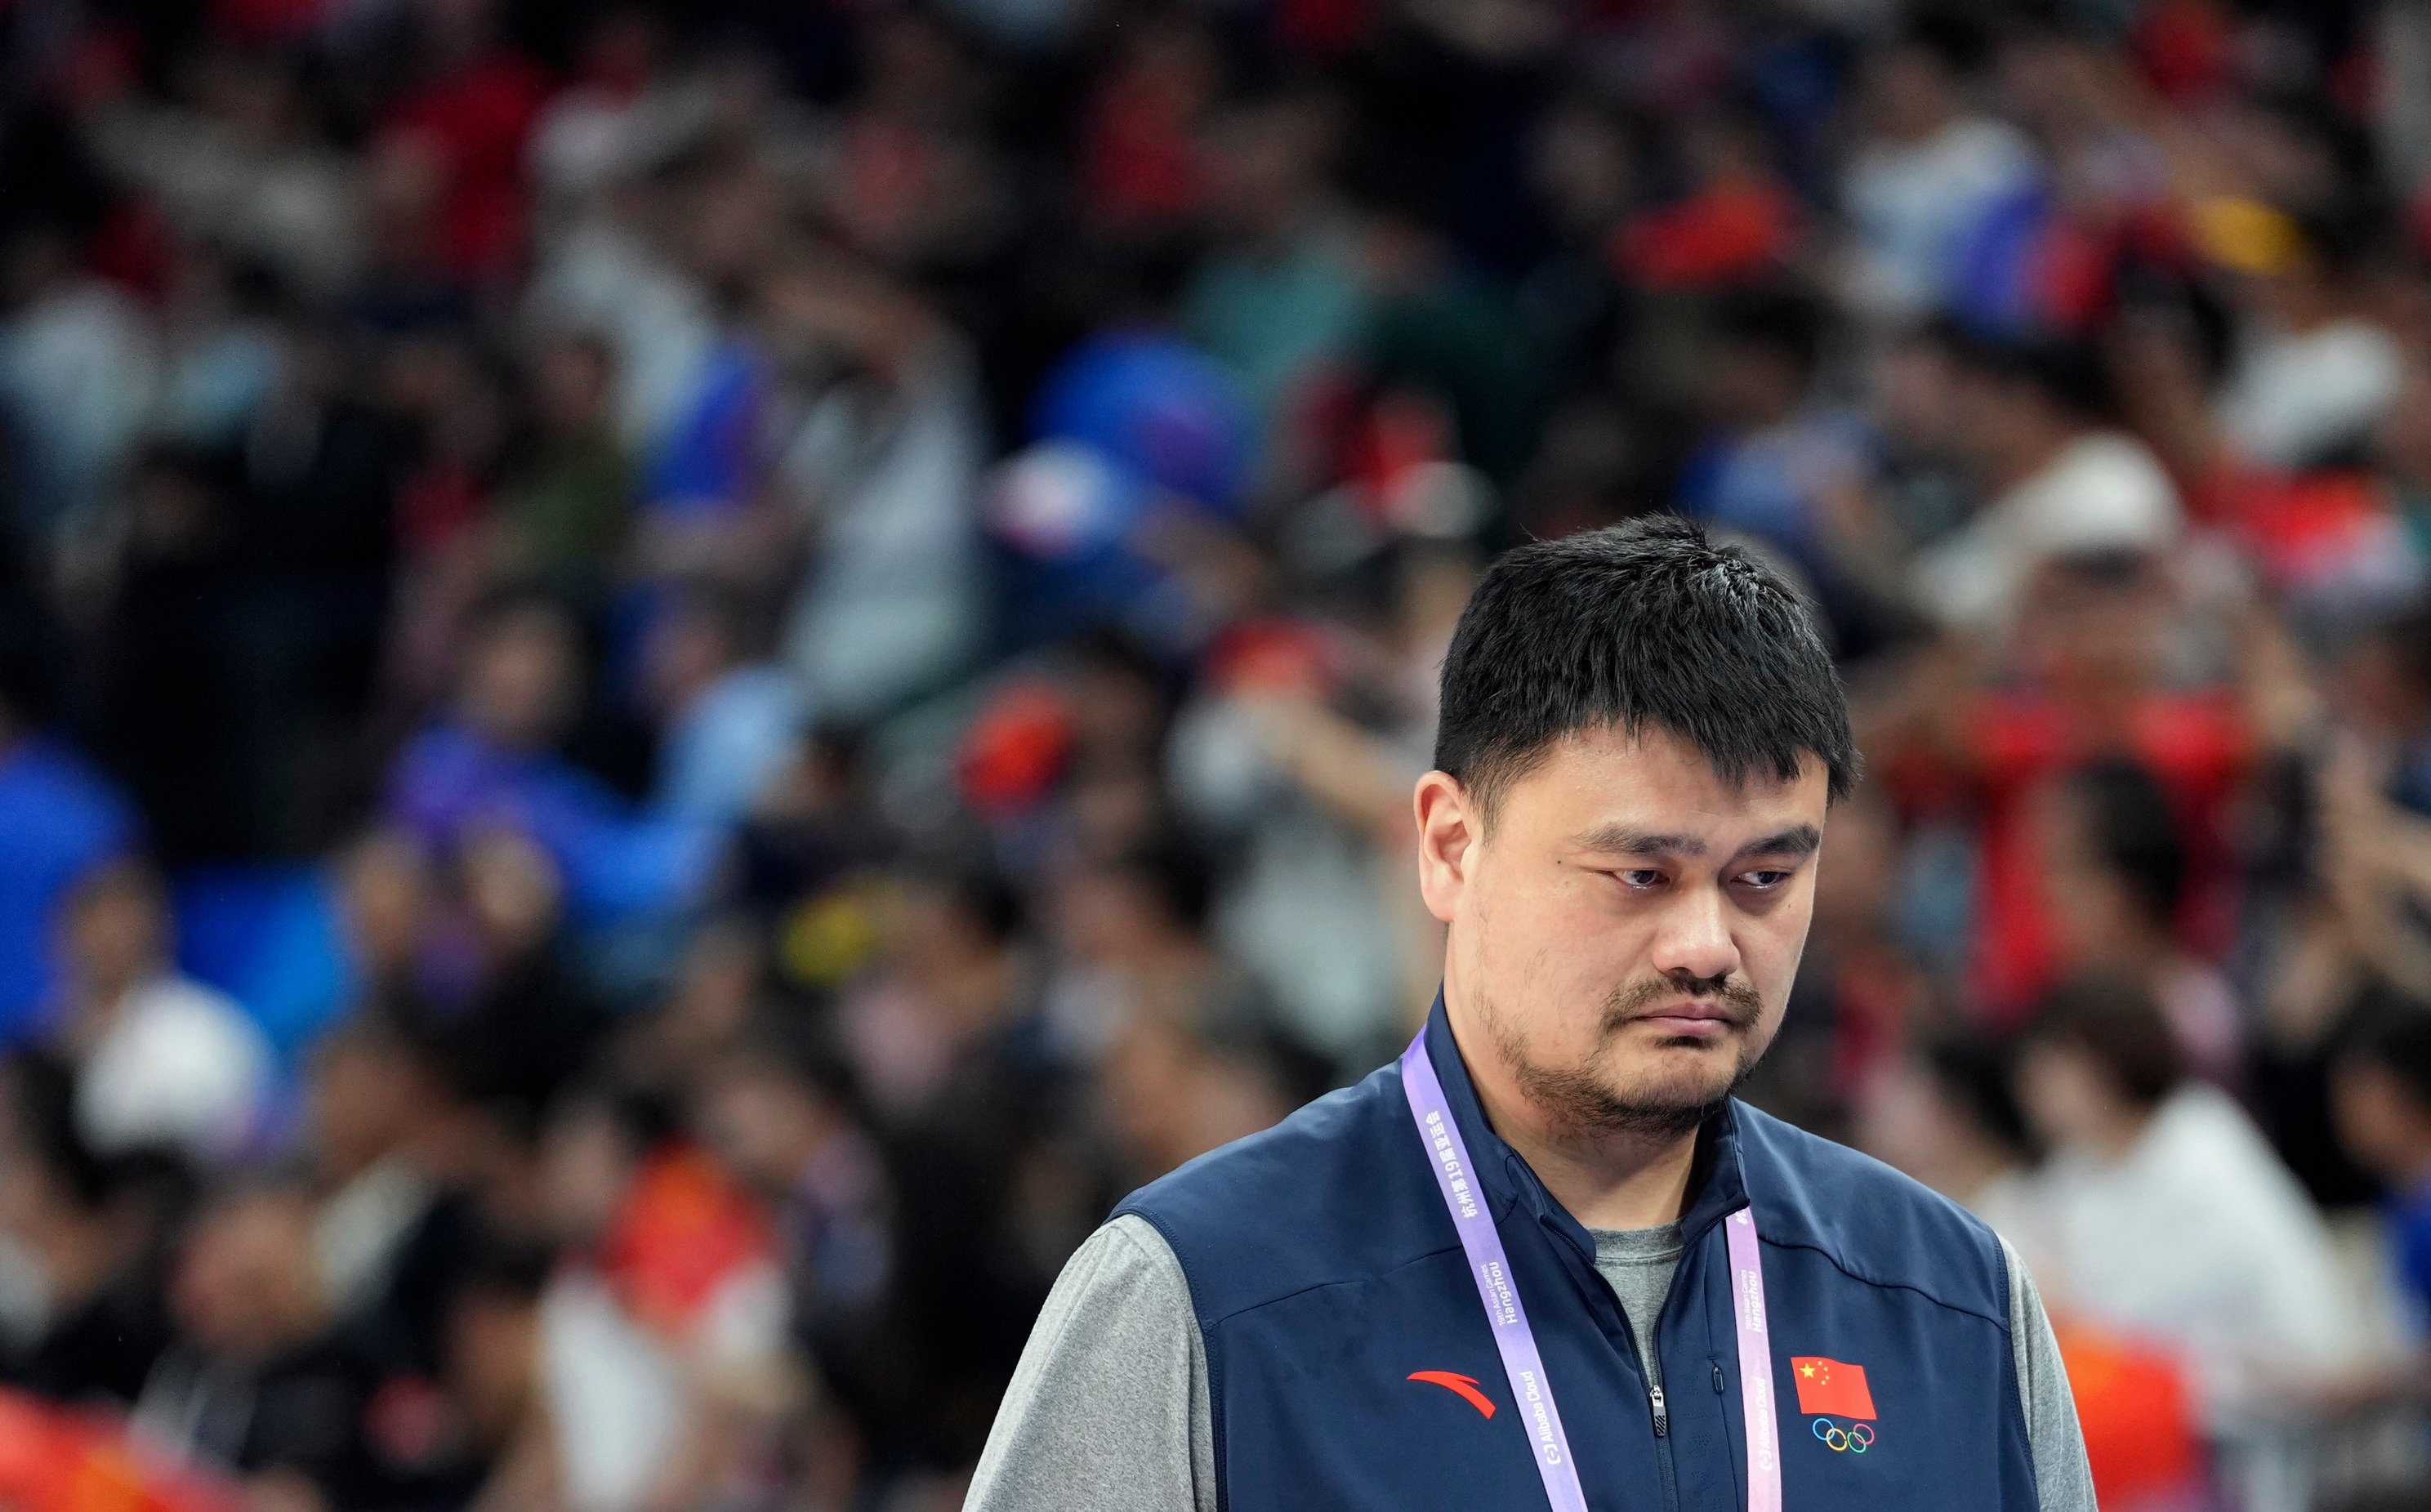 Yao Ming told state media it would take a big effort to upgrade the current system. Photo: Xinhua